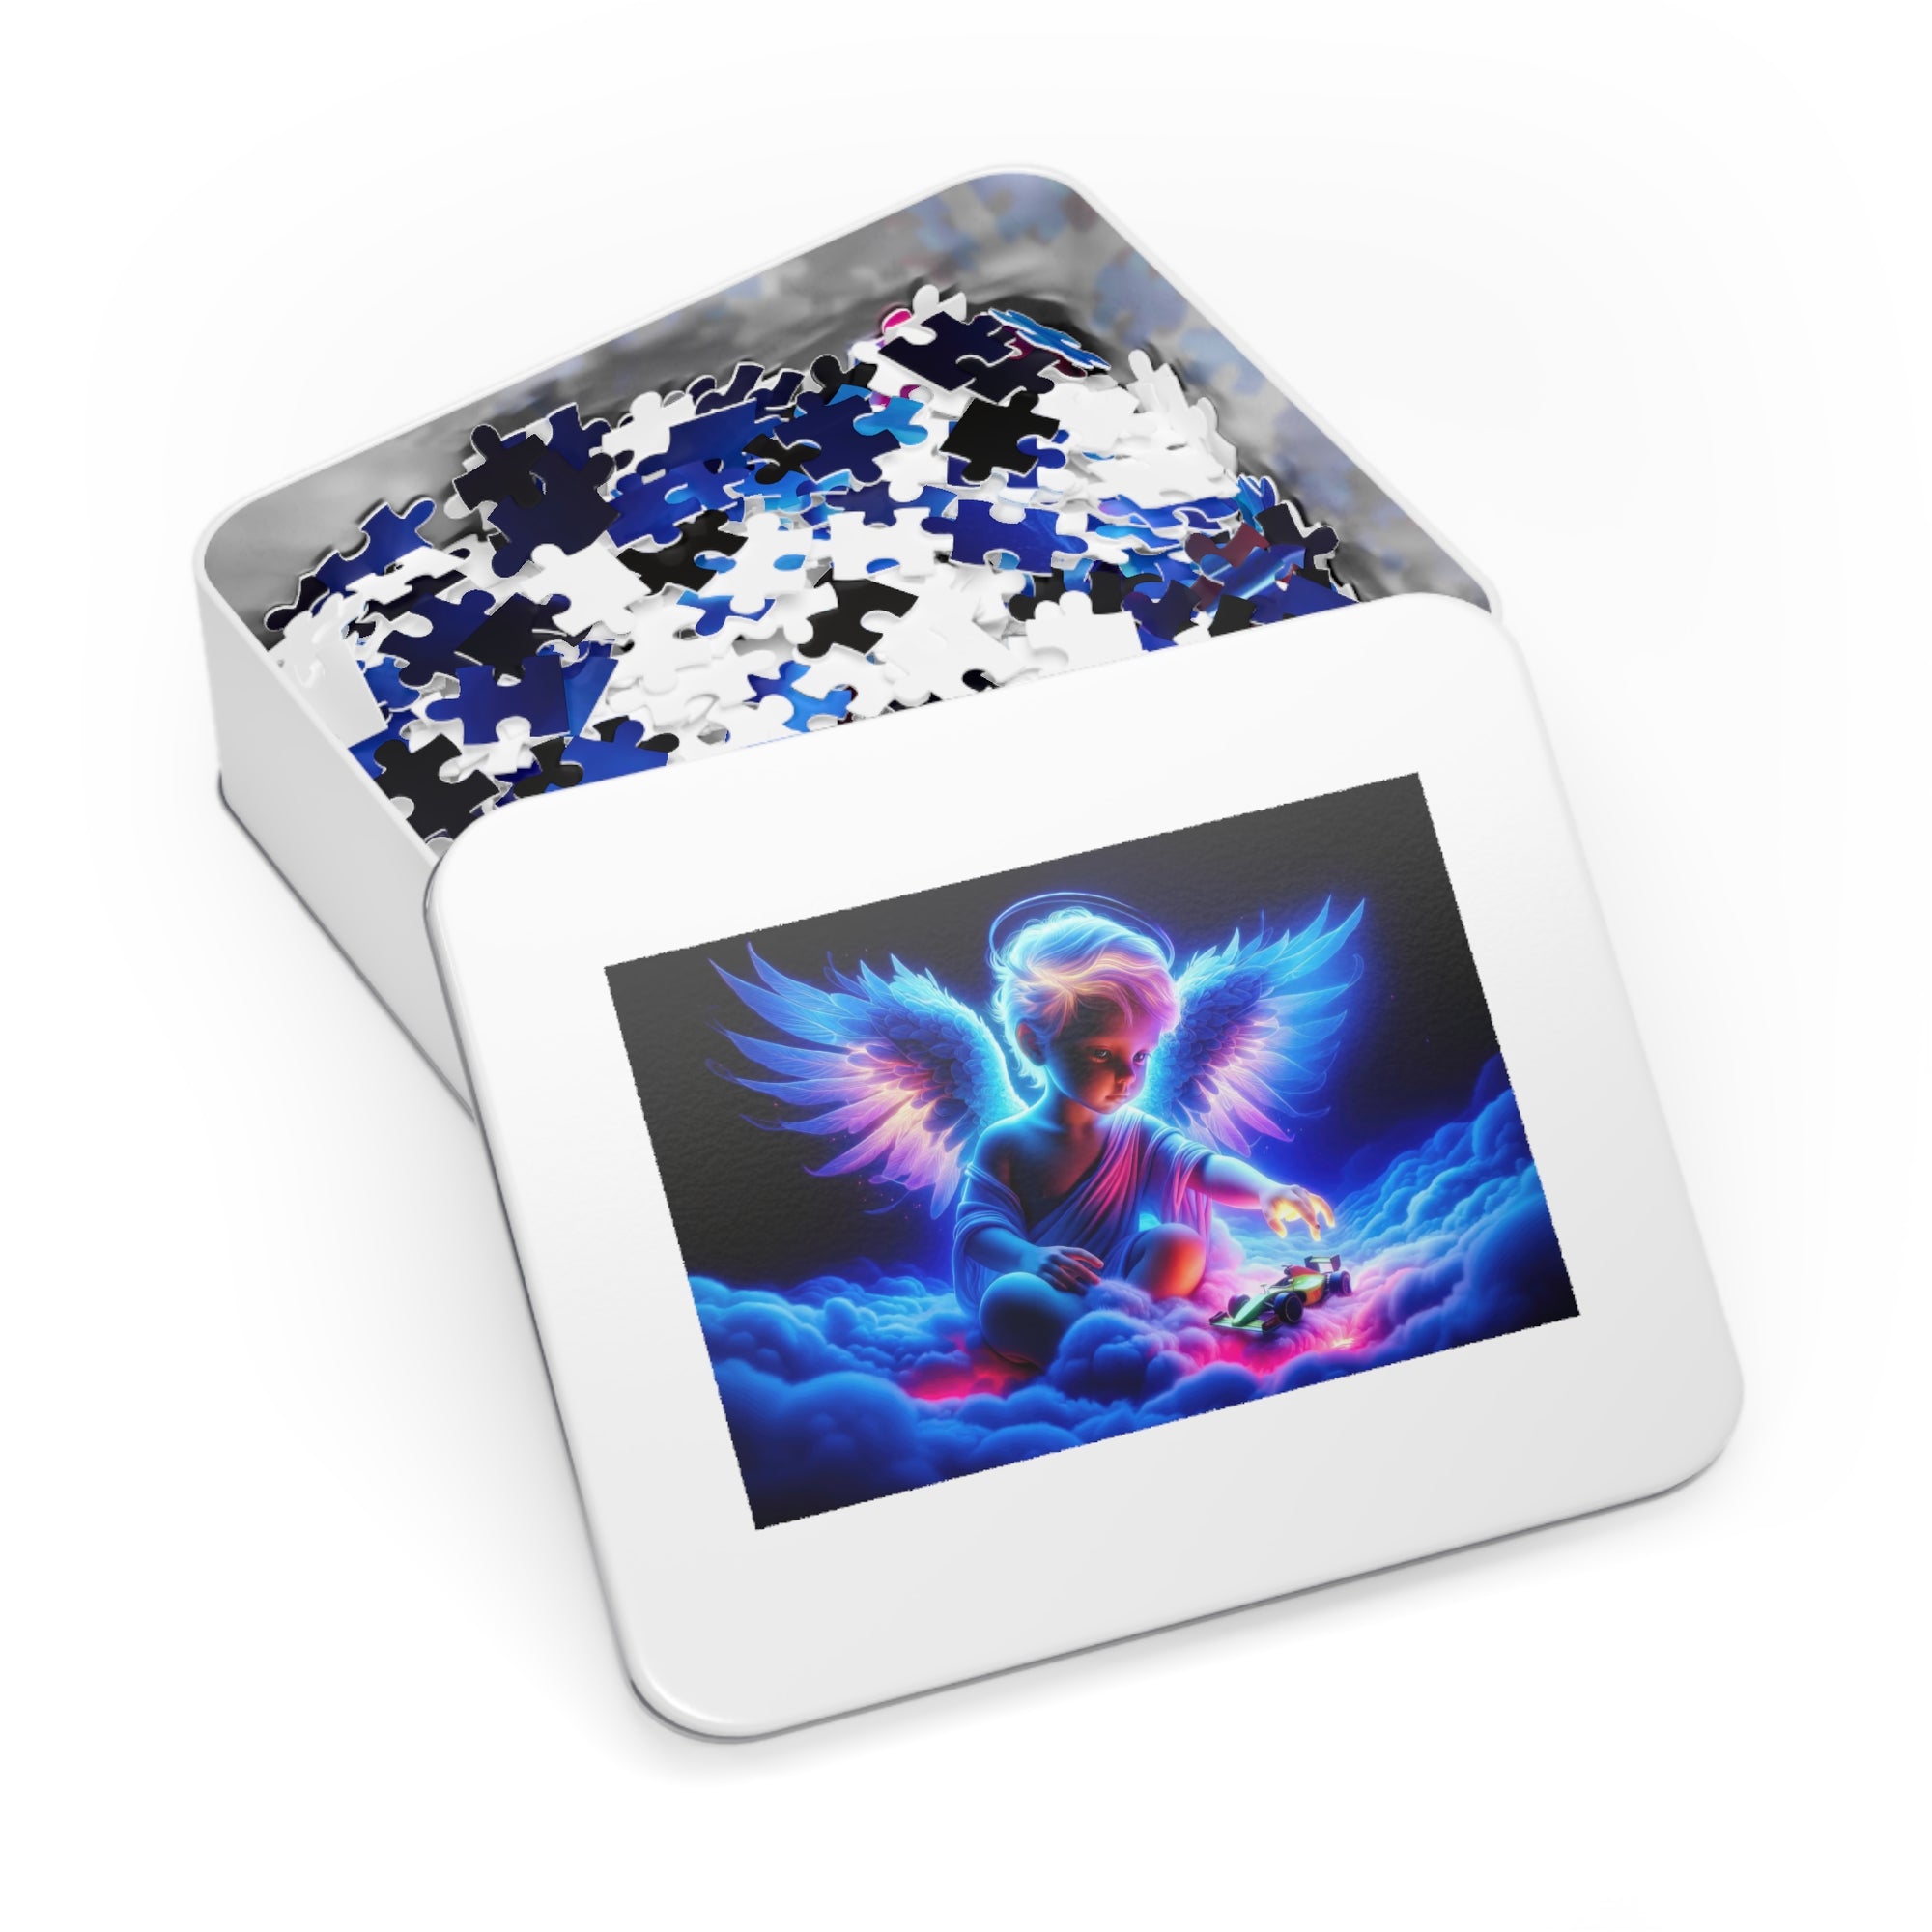 Playtime in the Cosmic Clouds Jigsaw Puzzle